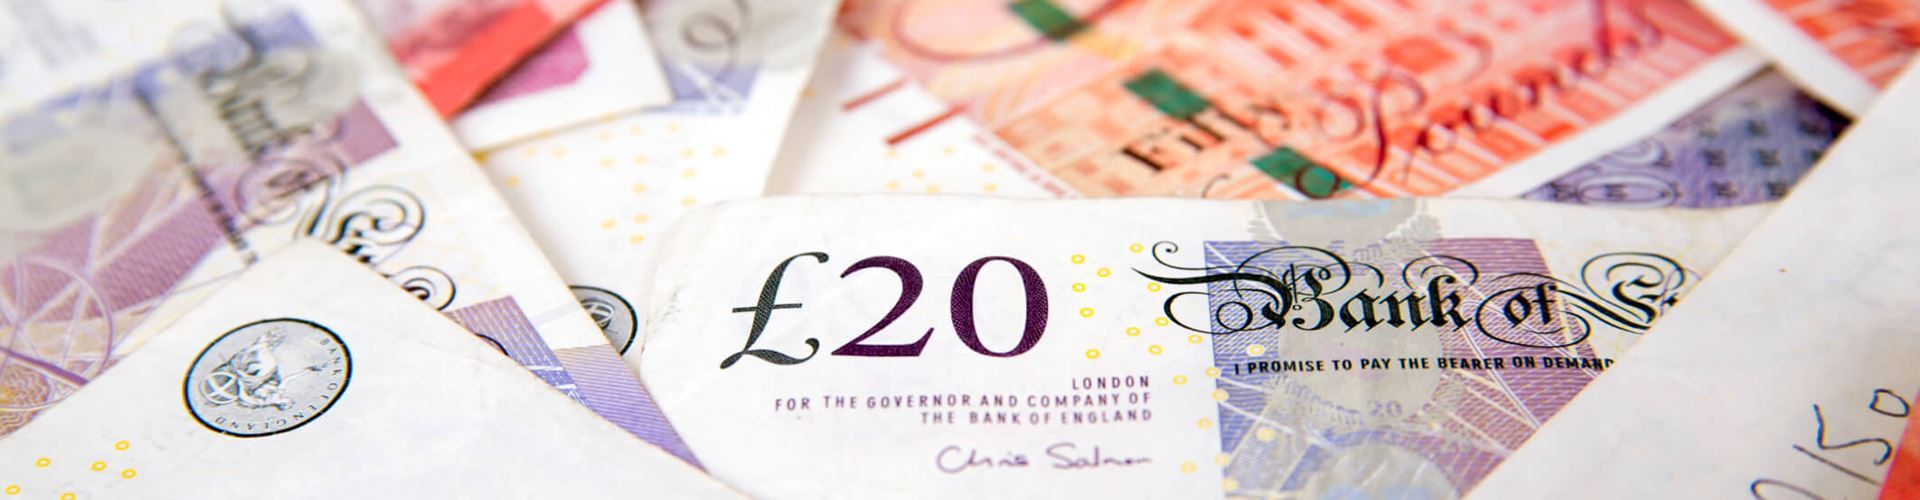 Small business lending reaches record high, figures show 